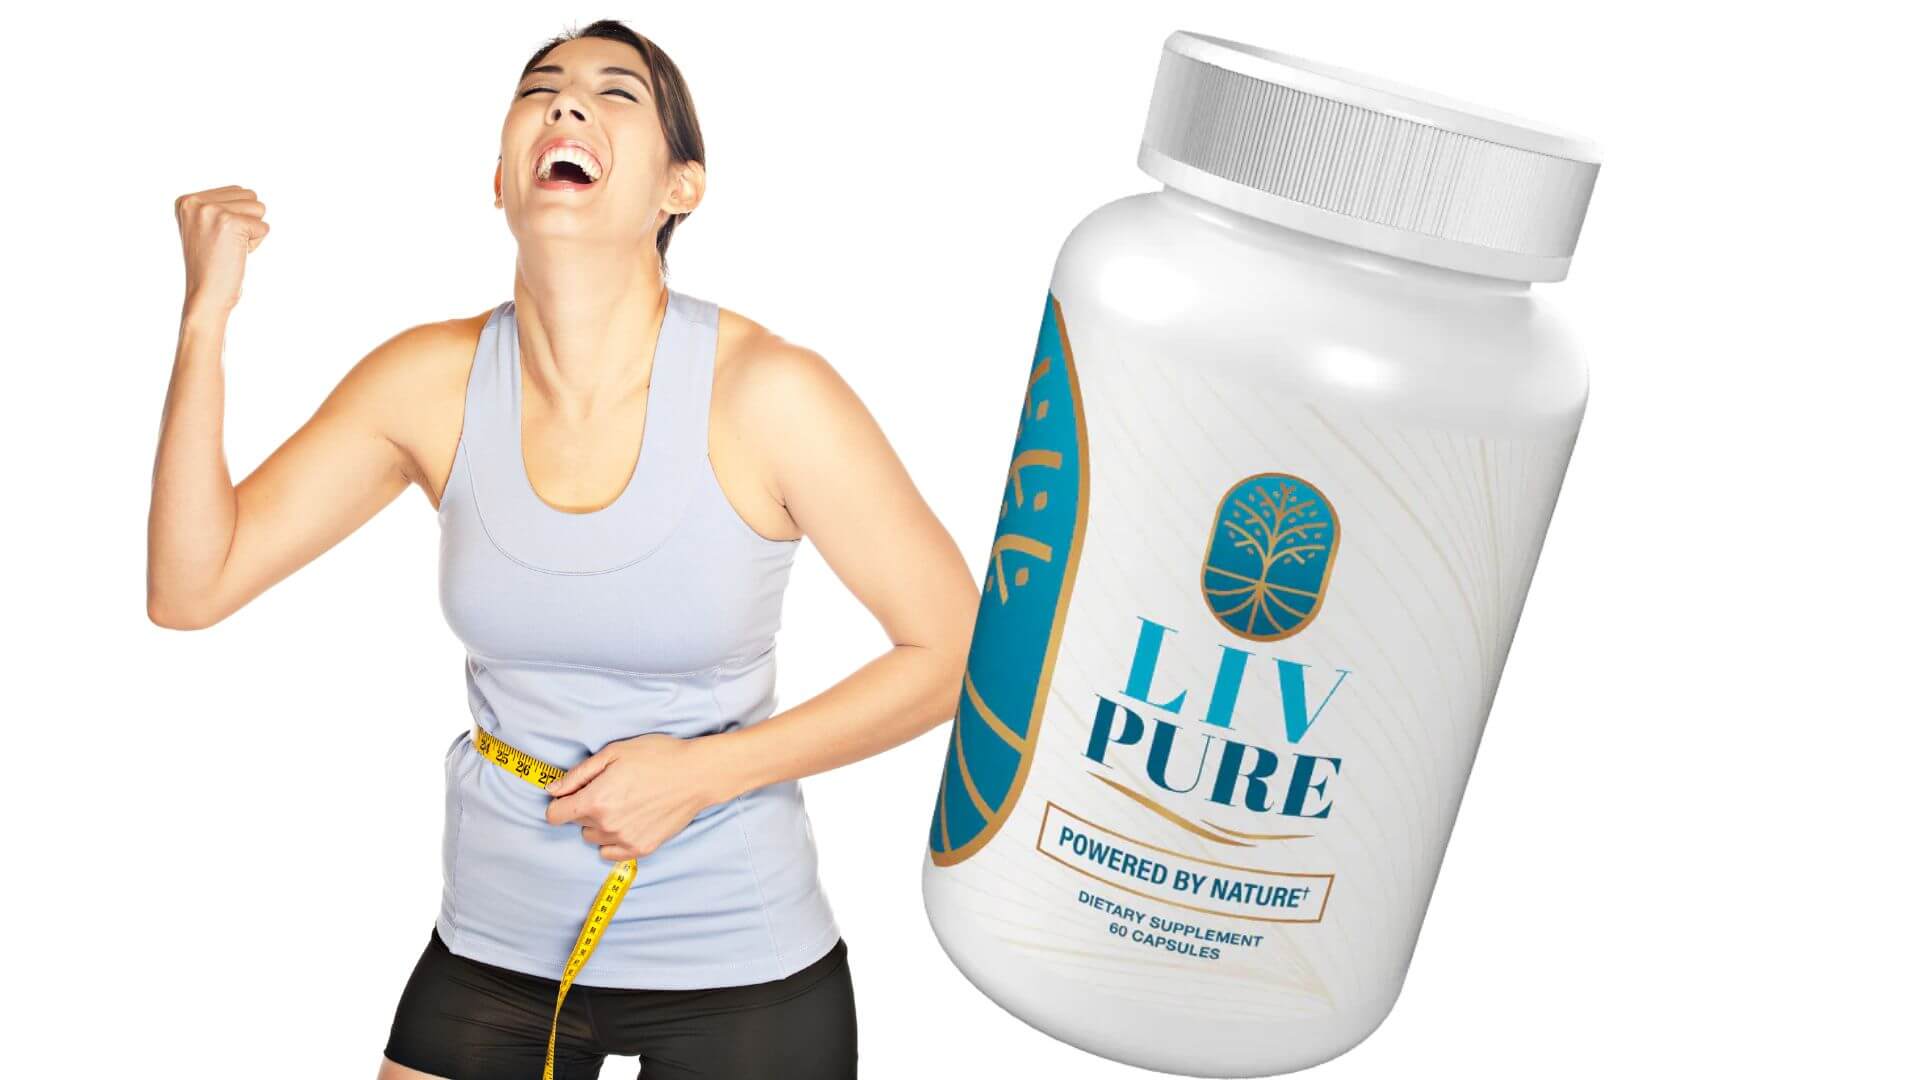 Livpure™ |OFFICIAL SITE - 100% Pure & Natural